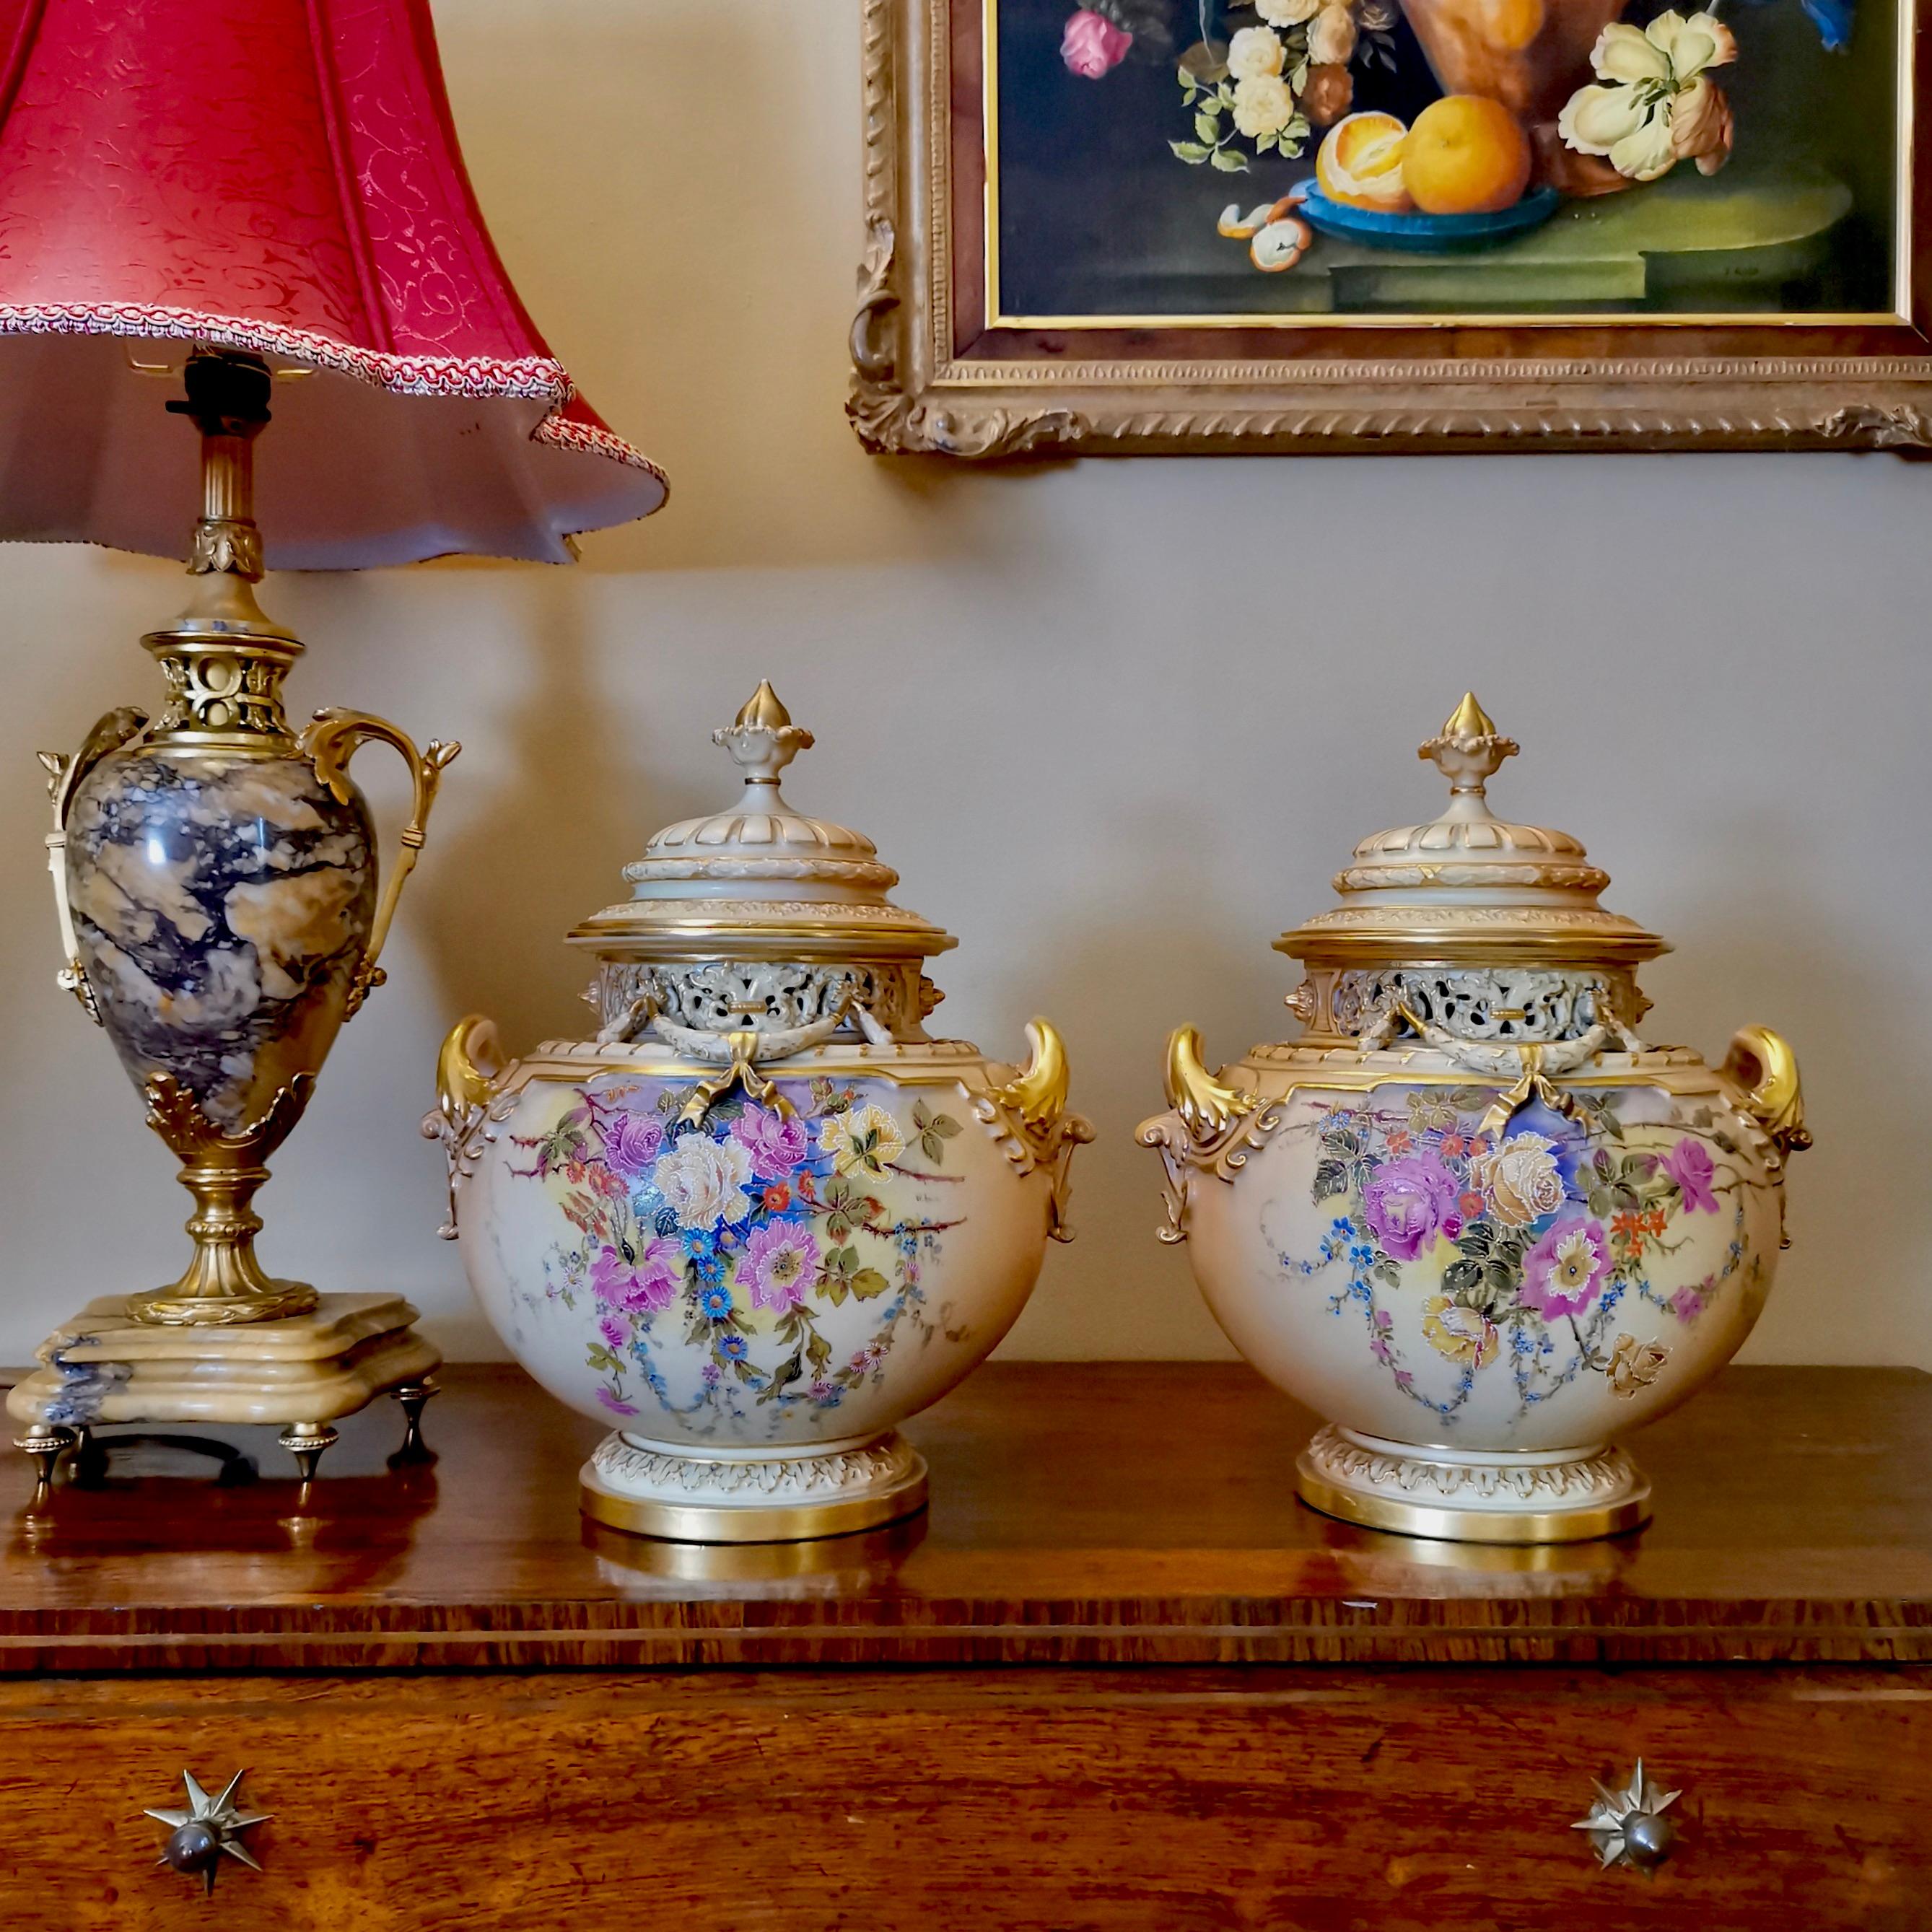 This is a very fine pair of lidded potpourri vases made by Royal Worcester in 1909. The potpourris are in the 